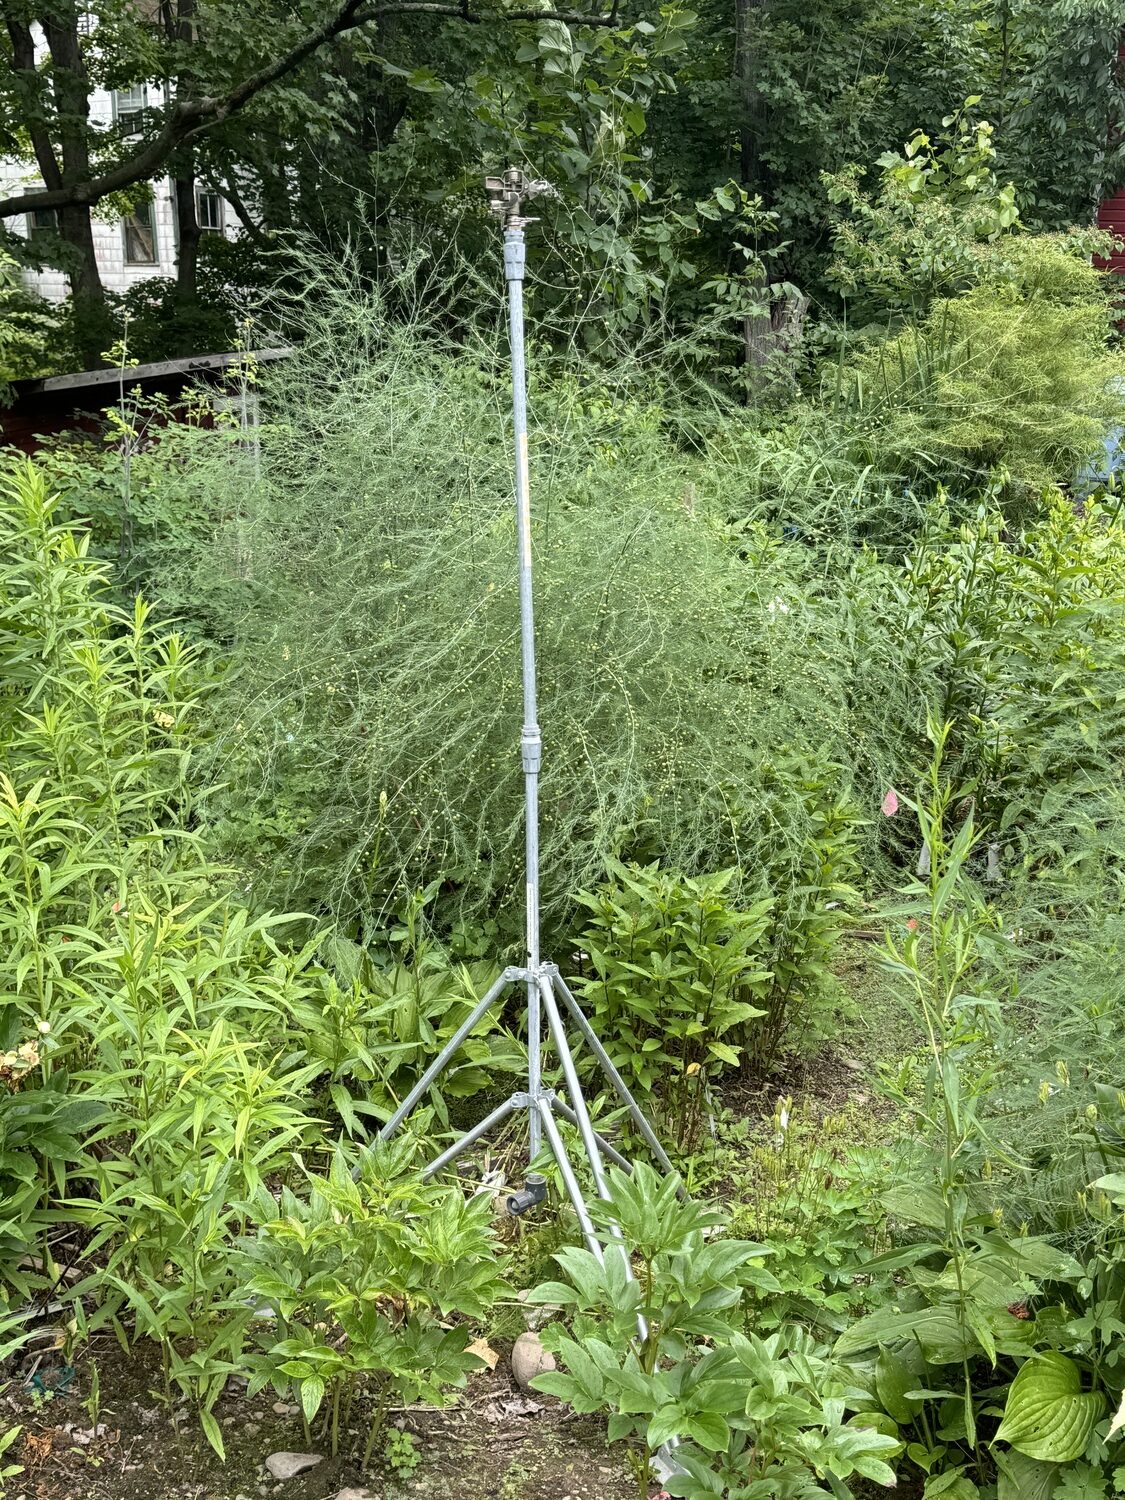 A tower or tripod impact sprinkler can reach over the foliage of a crowded garden.  Depending on the head, you can produce a fine spray over a small area or cover a circle up to 30 feet in diameter. The downside is that this is a very inefficient way to water plants. Expect to pay over $150, and remember the taller the tower the more it will wobble. Some are height adjustable.   ANDREW MESSINGER